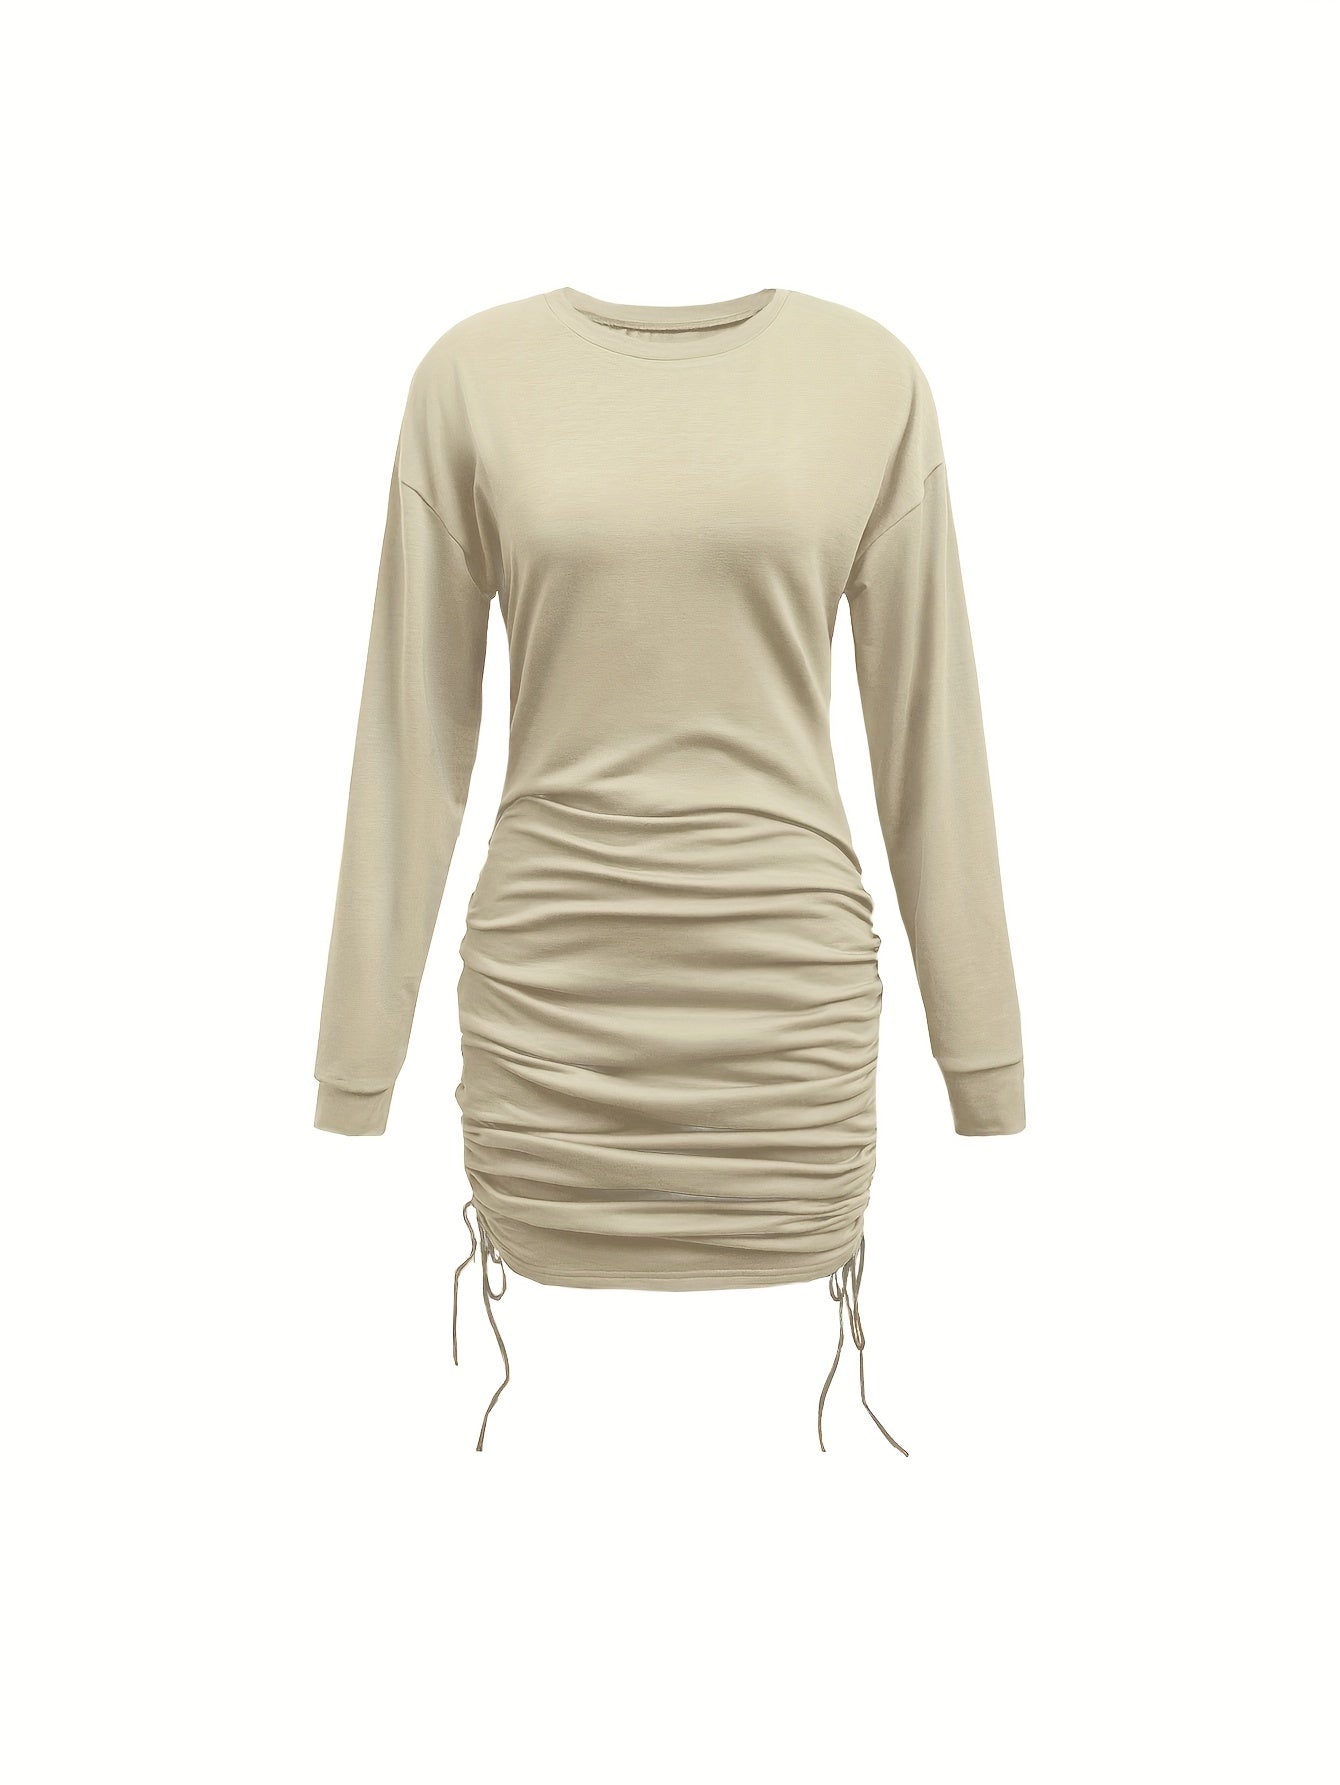 Ruched Drawstring Dress, Casual Crew Neck Long Sleeve Dress, Women's Clothing